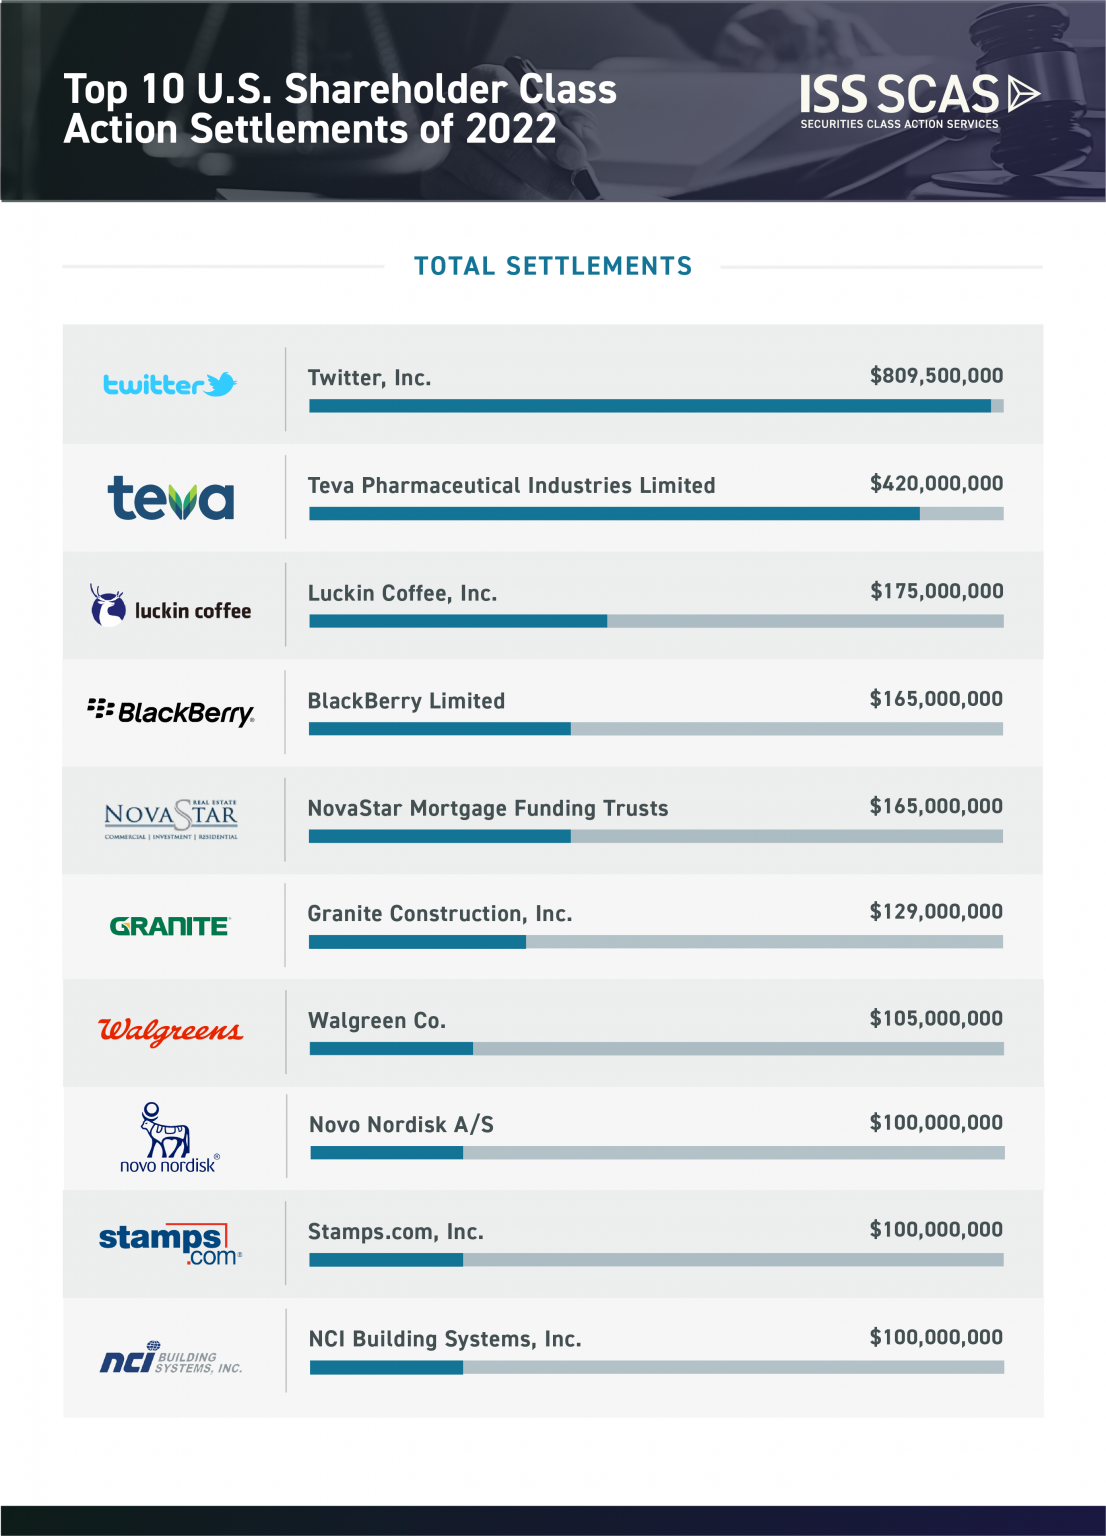 The Largest Class Action Settlements of 2022